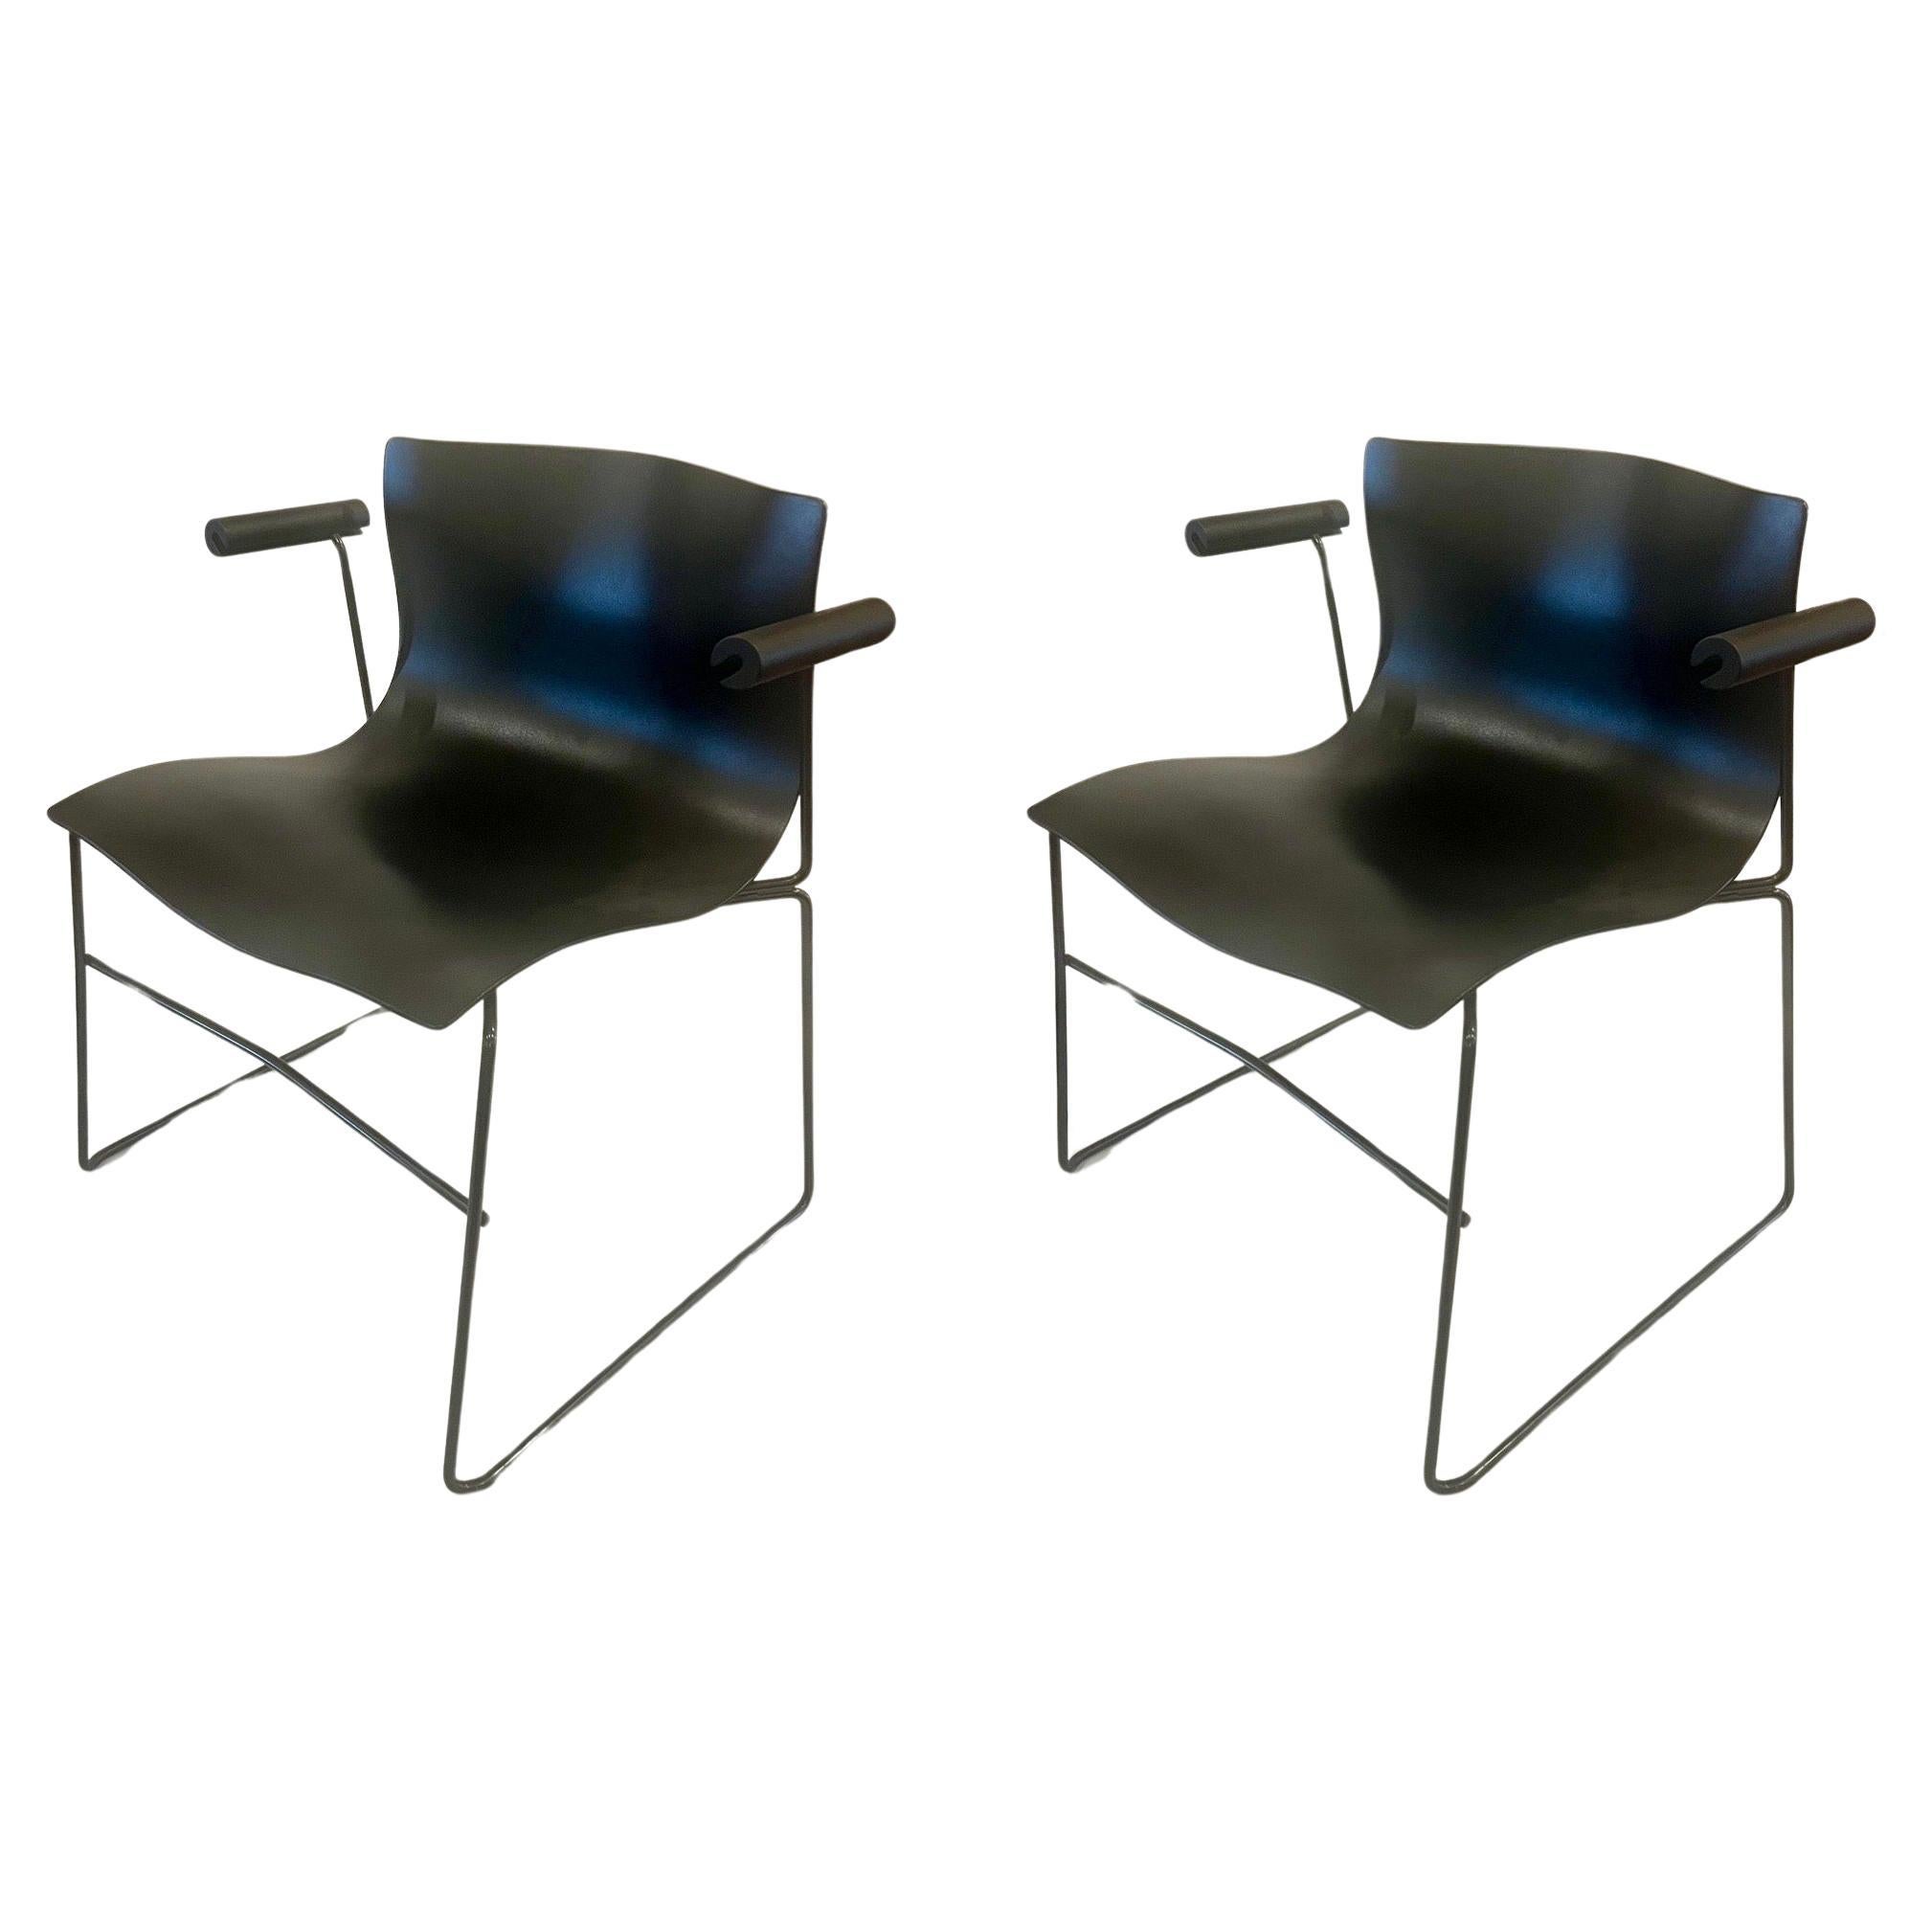 Pair of Handkerchief Armchairs  Designed by Massimo Vignelli for Knoll Studio For Sale